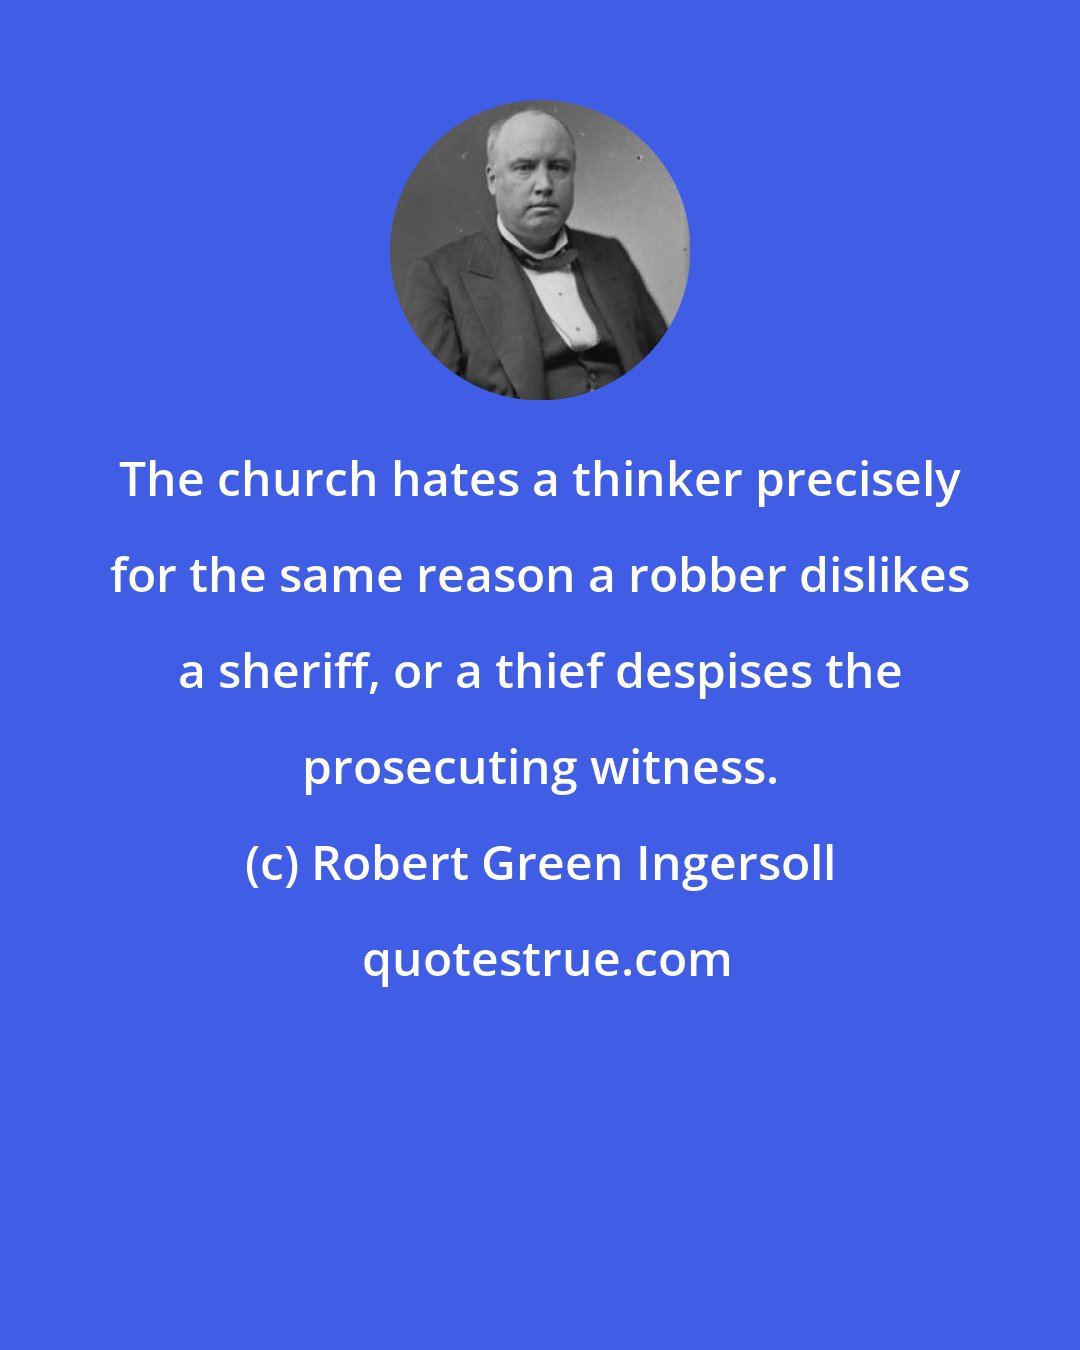 Robert Green Ingersoll: The church hates a thinker precisely for the same reason a robber dislikes a sheriff, or a thief despises the prosecuting witness.